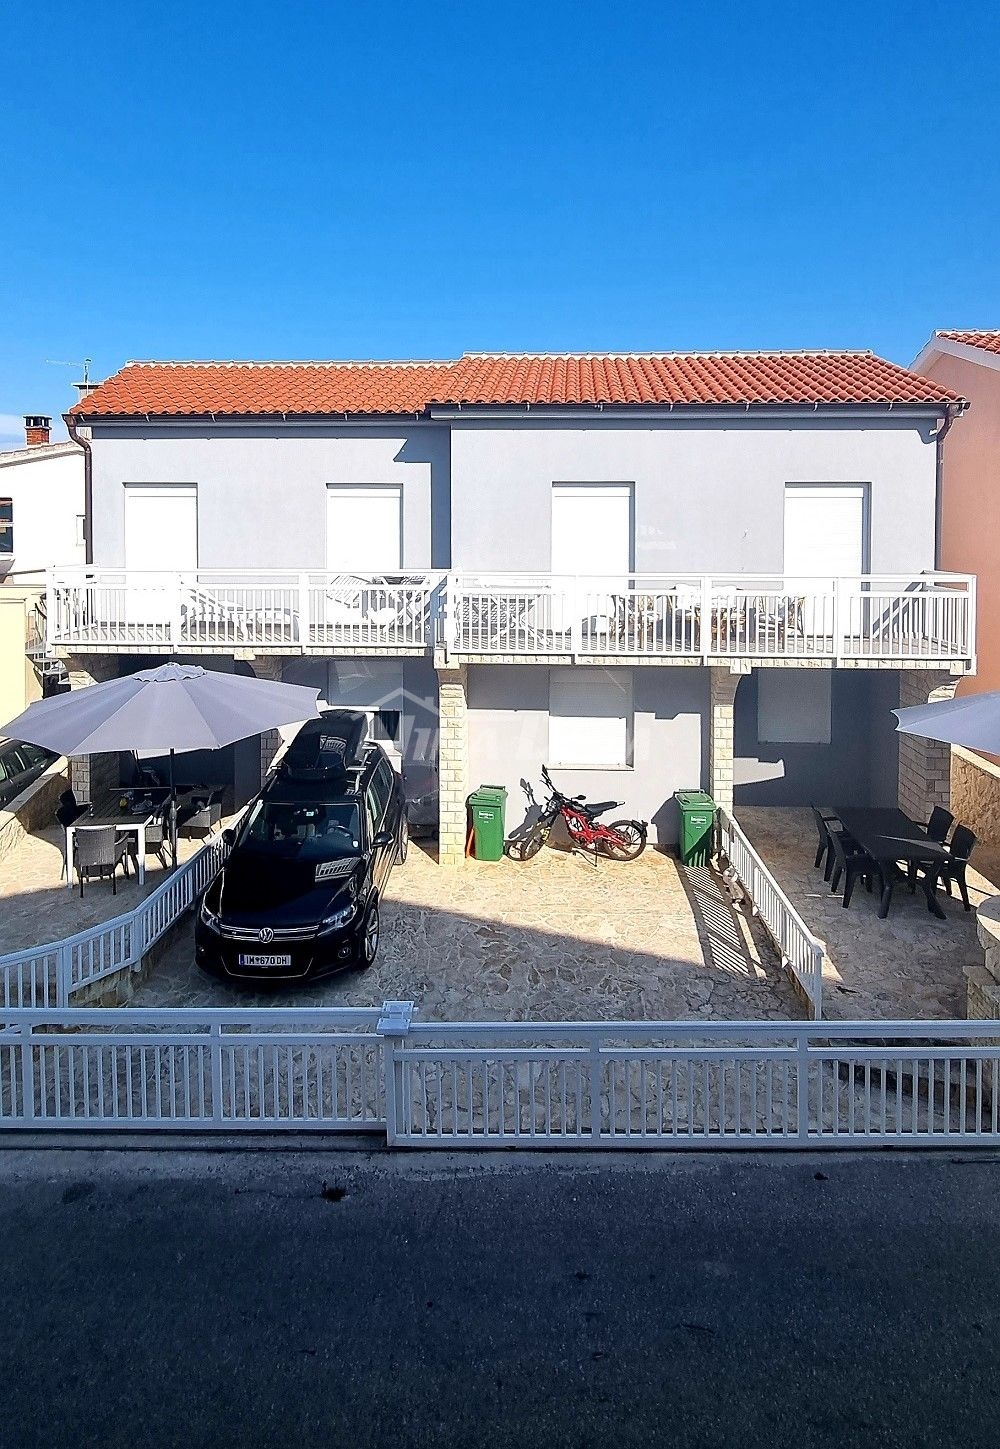 Property with two storey apartments 80 meters from the sea.